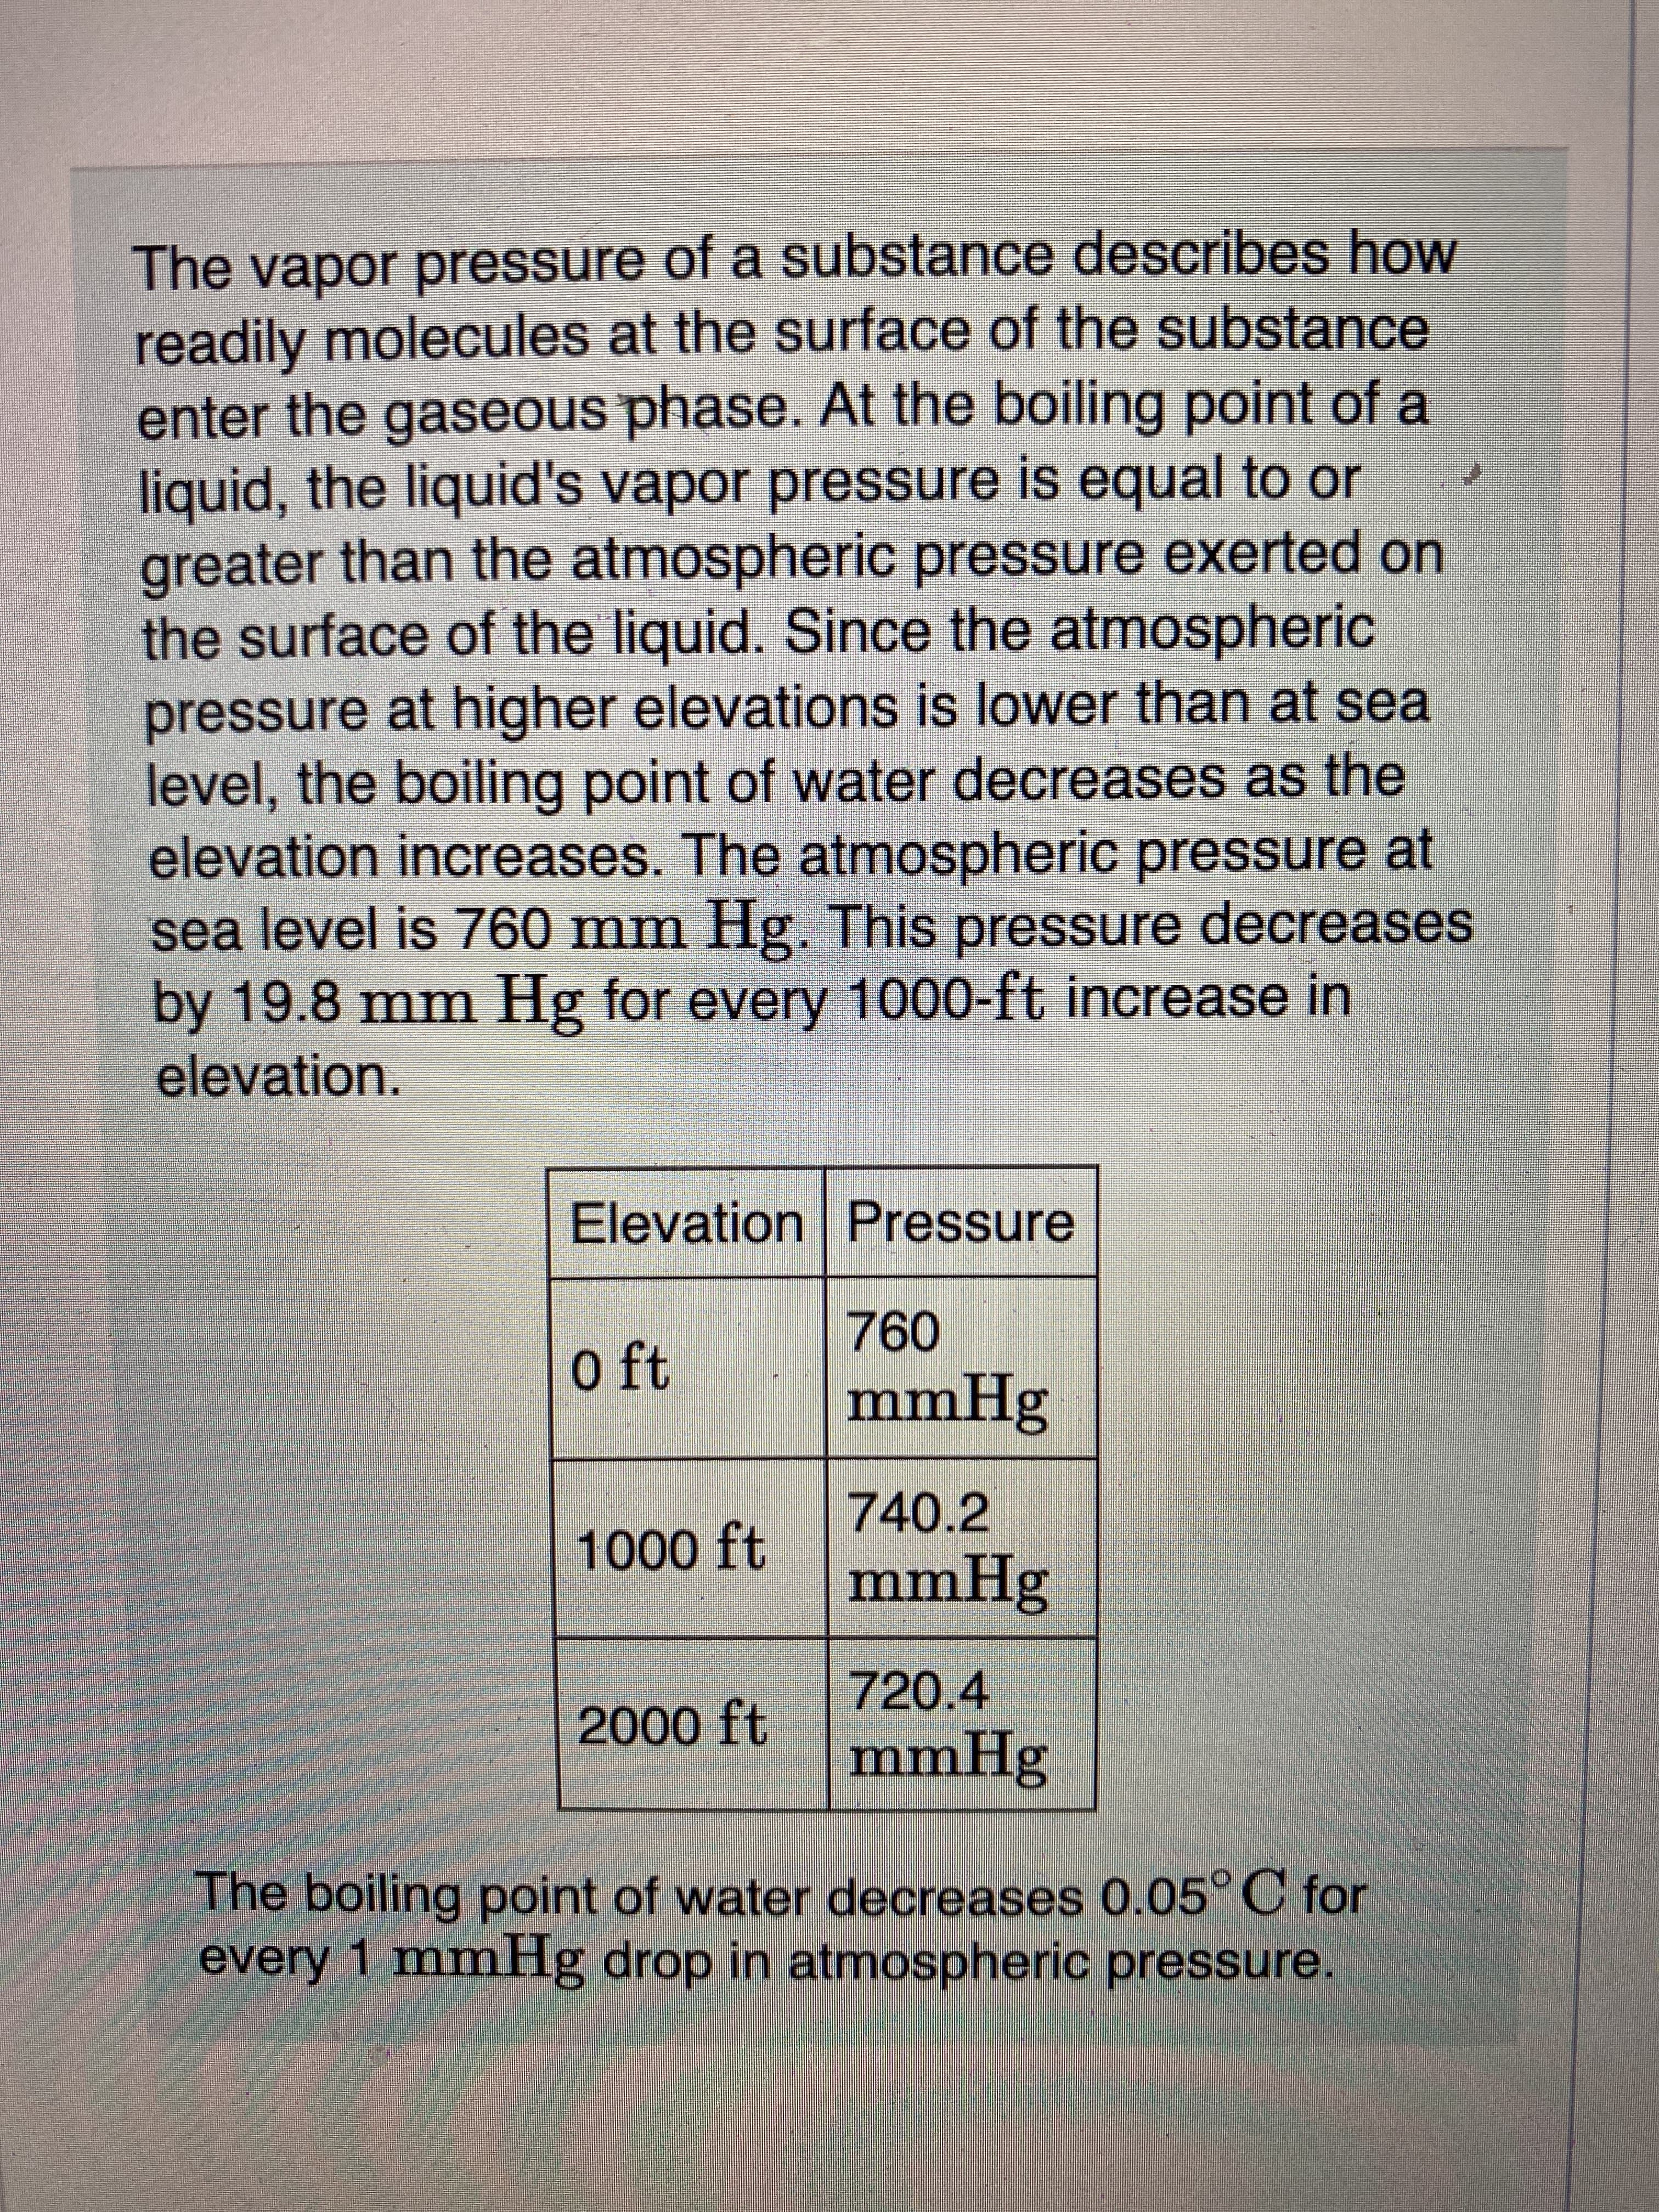 The vapor pressure of a substance describes how
readily molecules at the surface of the substance
enter the gaseous phase. At the boiling point of a
liquid, the liquid's vapor pressure is equal to or
greater than the atmospheric pressure exerted on
the surface of the liquid. Since the atmospheric
pressure at higher elevations is lower than at sea
level, the boiling point of water decreases as the
elevation increases. The atmospheric pressure at
sea level is 760 mm Hg. This pressure decreases
by 19.8 mm Hg for every 1000-ft increase in
elevation.
Elevation Pressure
o ft
1000 ft
2000 ft
760
mmHg
740.2
mmHg
720.4
mmHg
The boiling point of water decreases 0.05°C for
every 1 mmHg drop in atmospheric pressure.